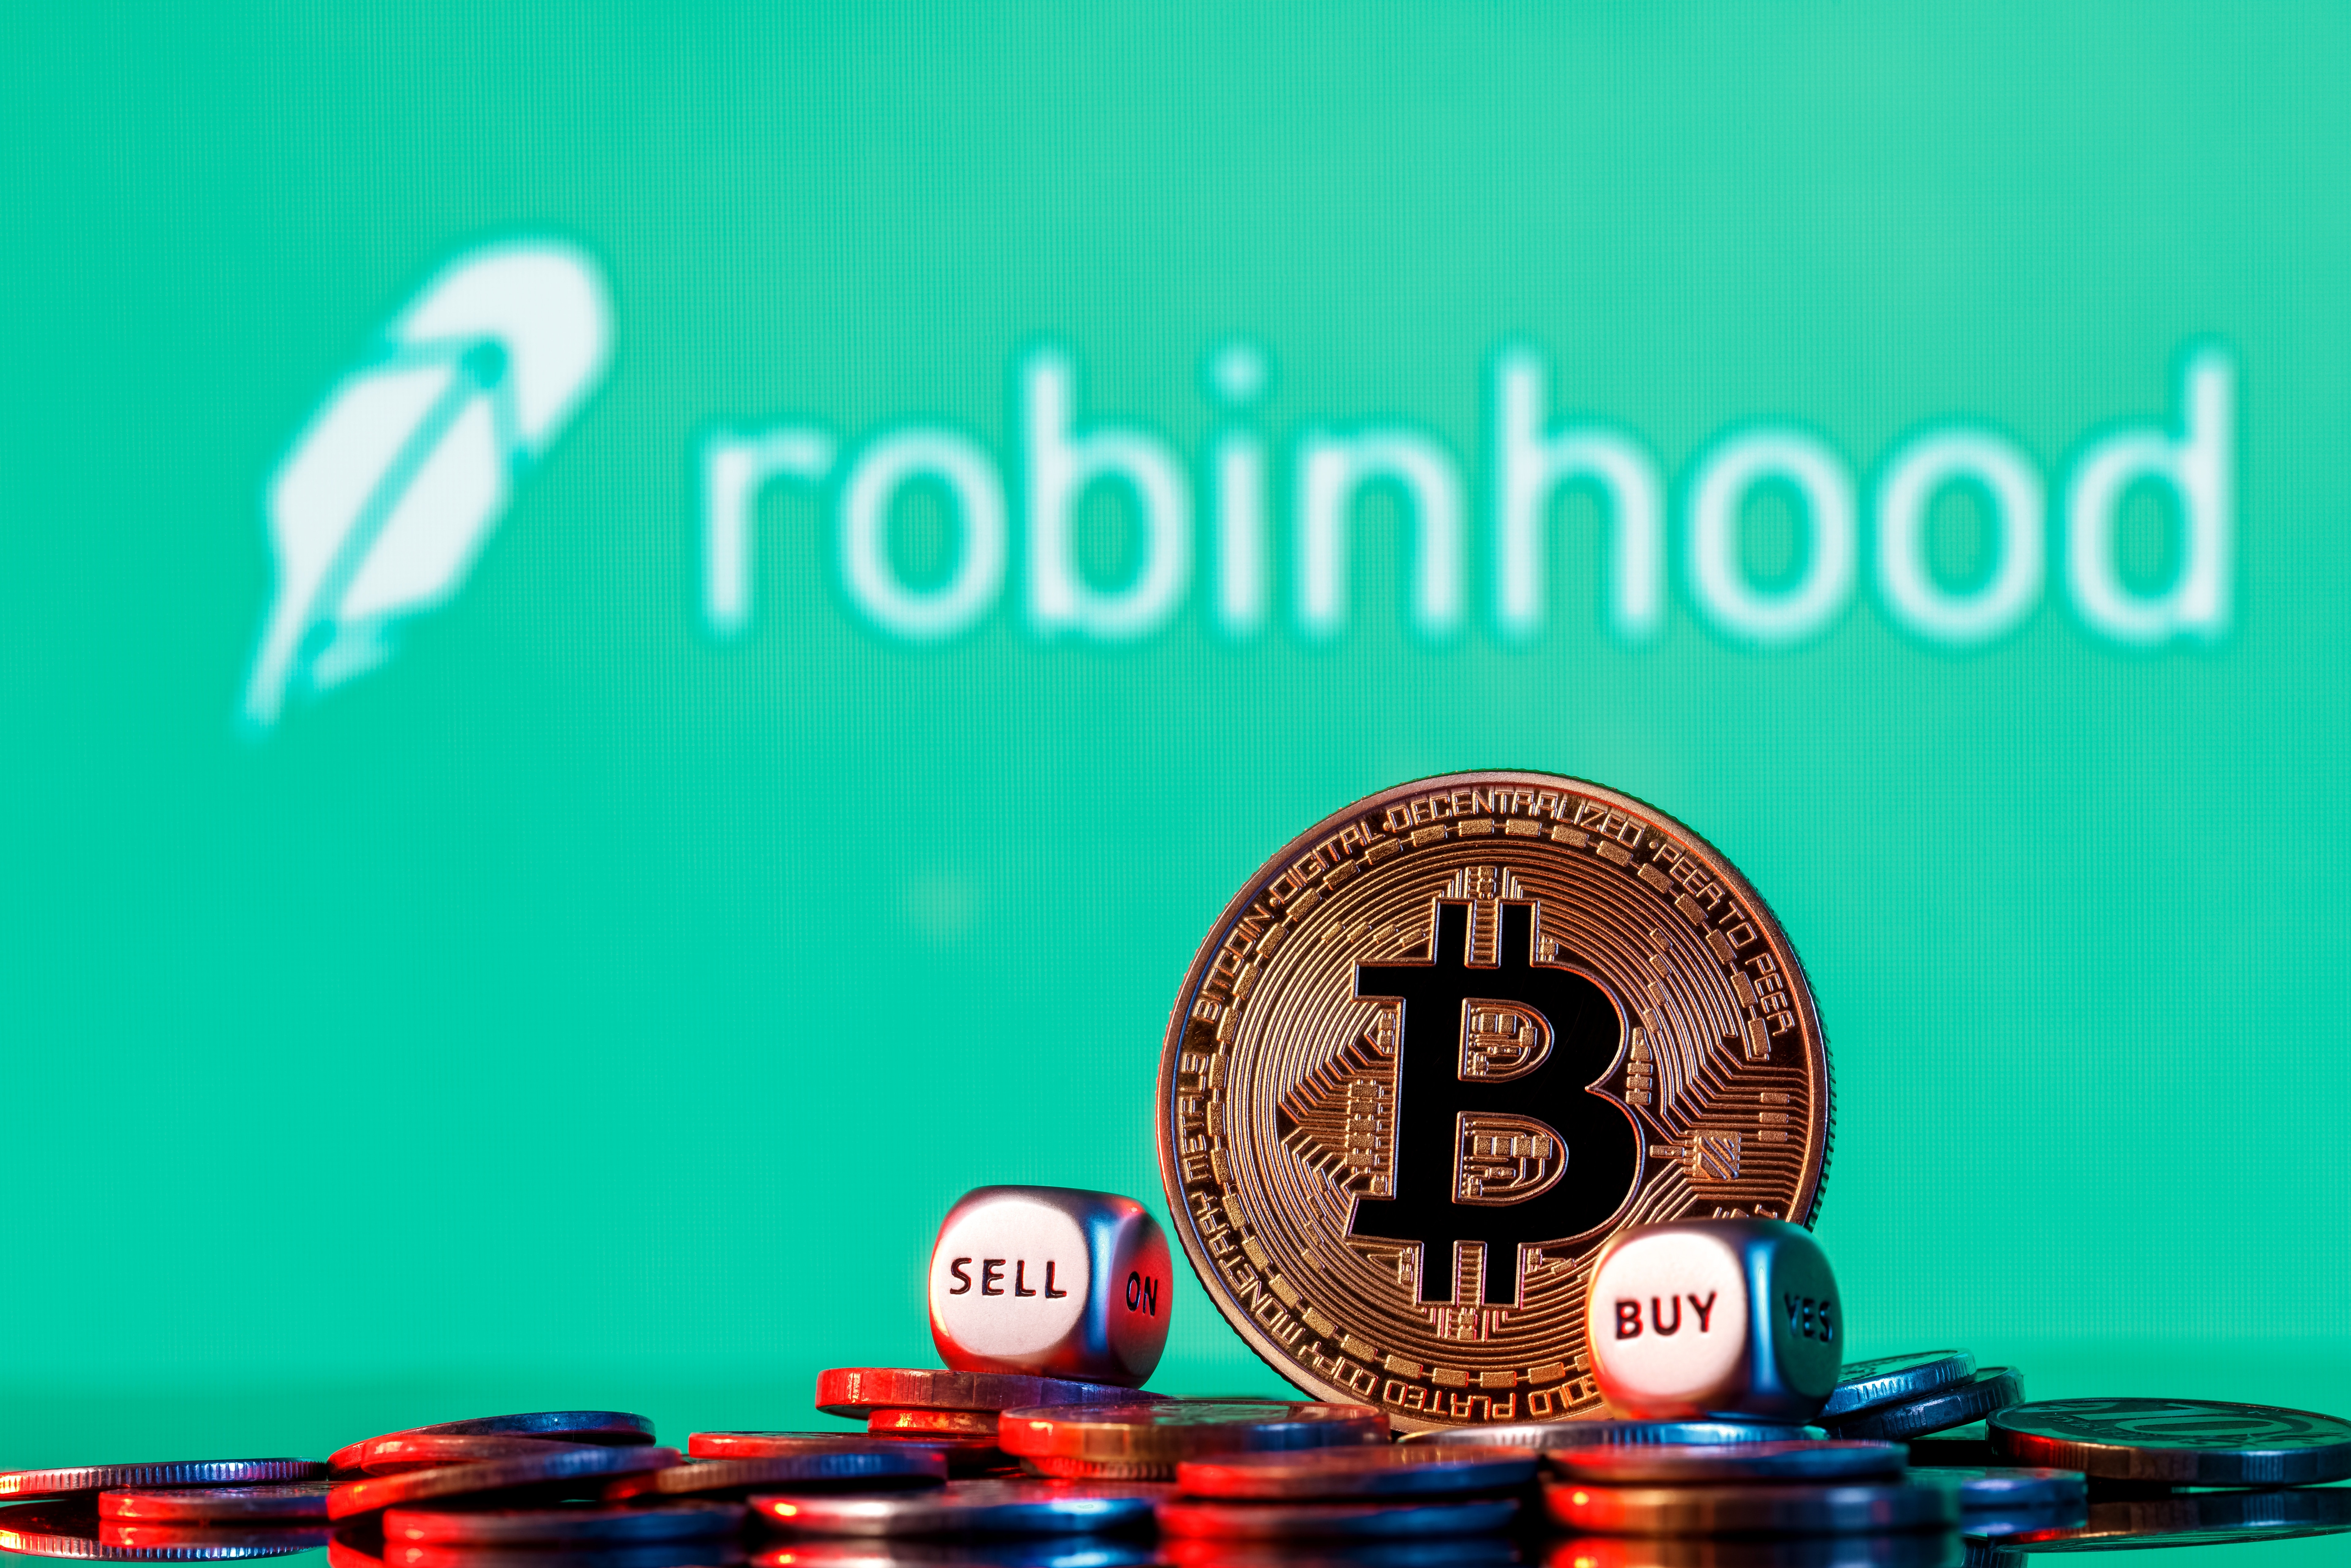 Robinhood CEO Says Crypto Additions Are Slow — But It Will 'Pay Off In Long-Term'